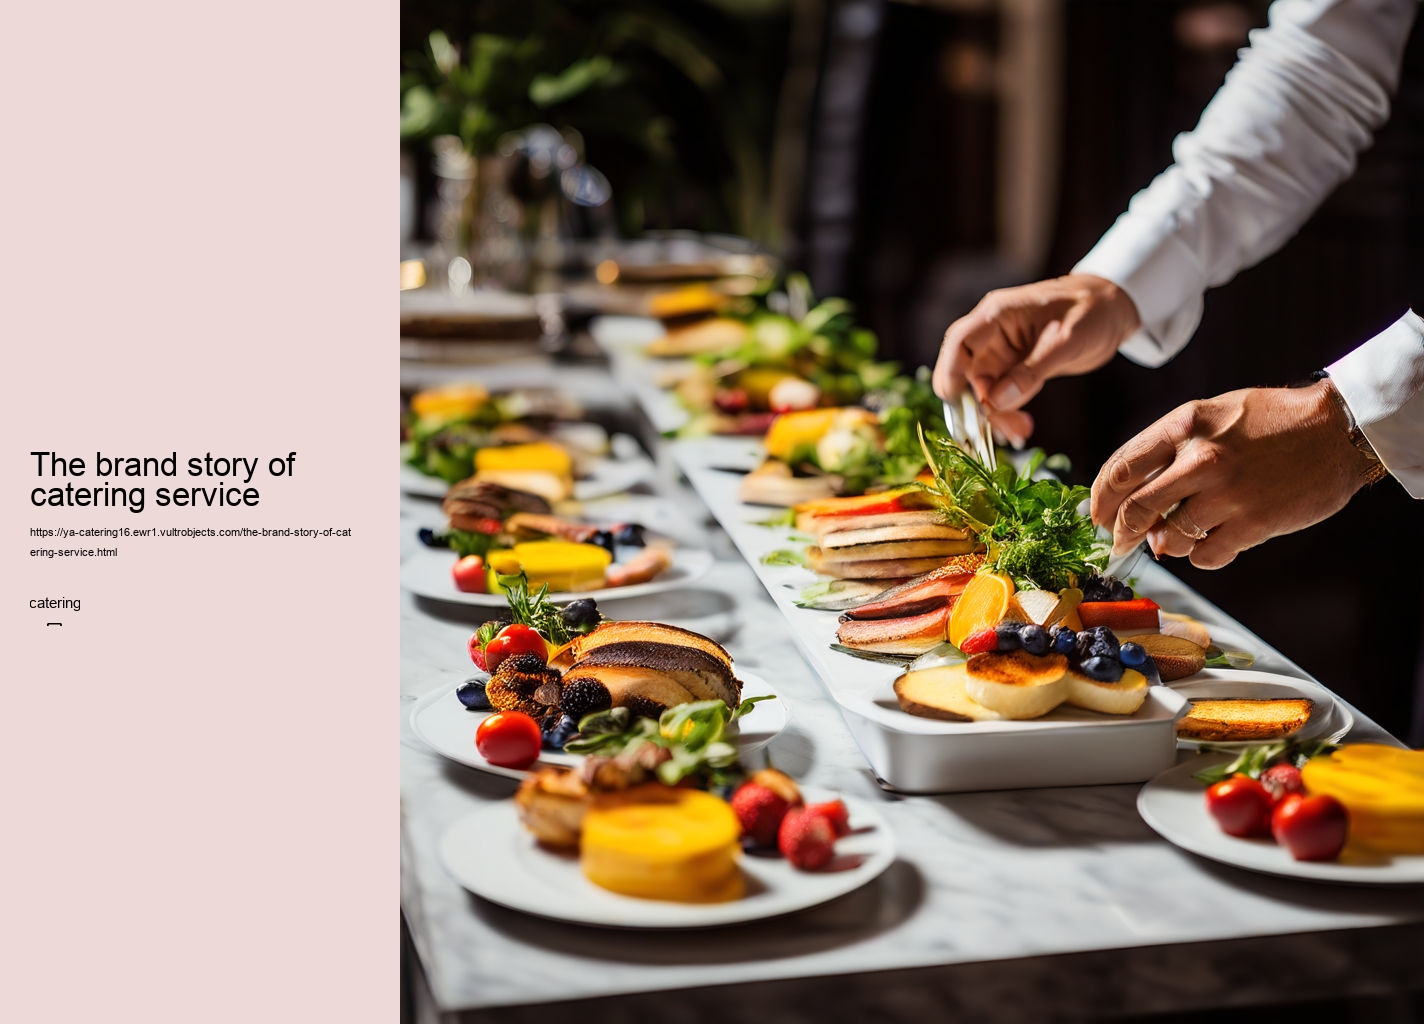 The brand story of catering service